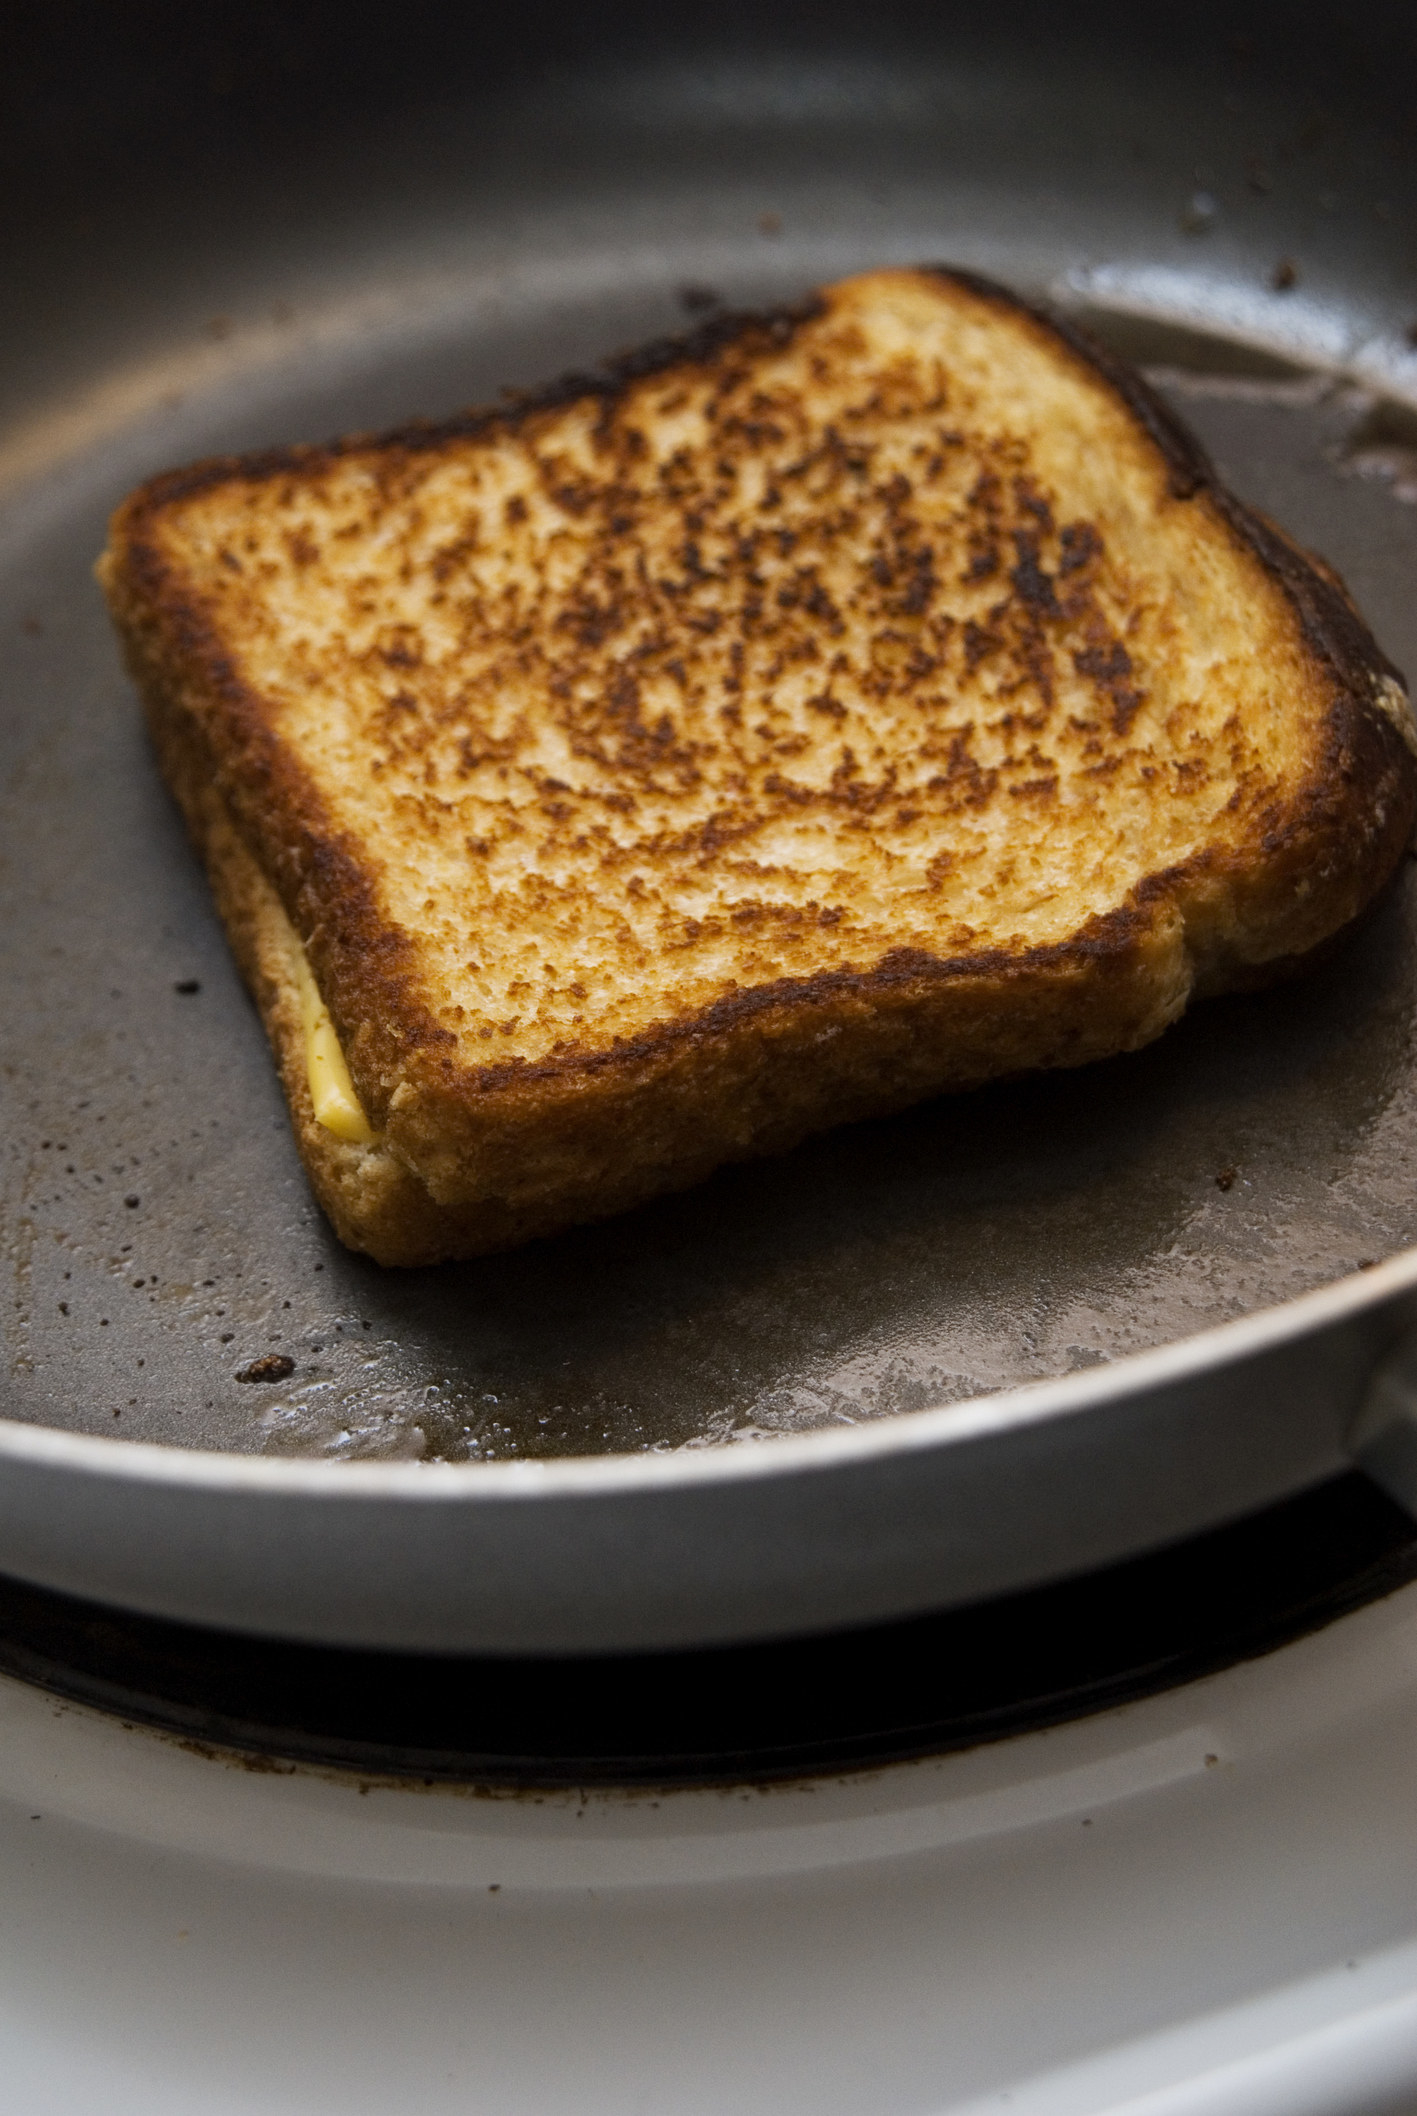 Grilled cheese sandwich in frying pan on stove.